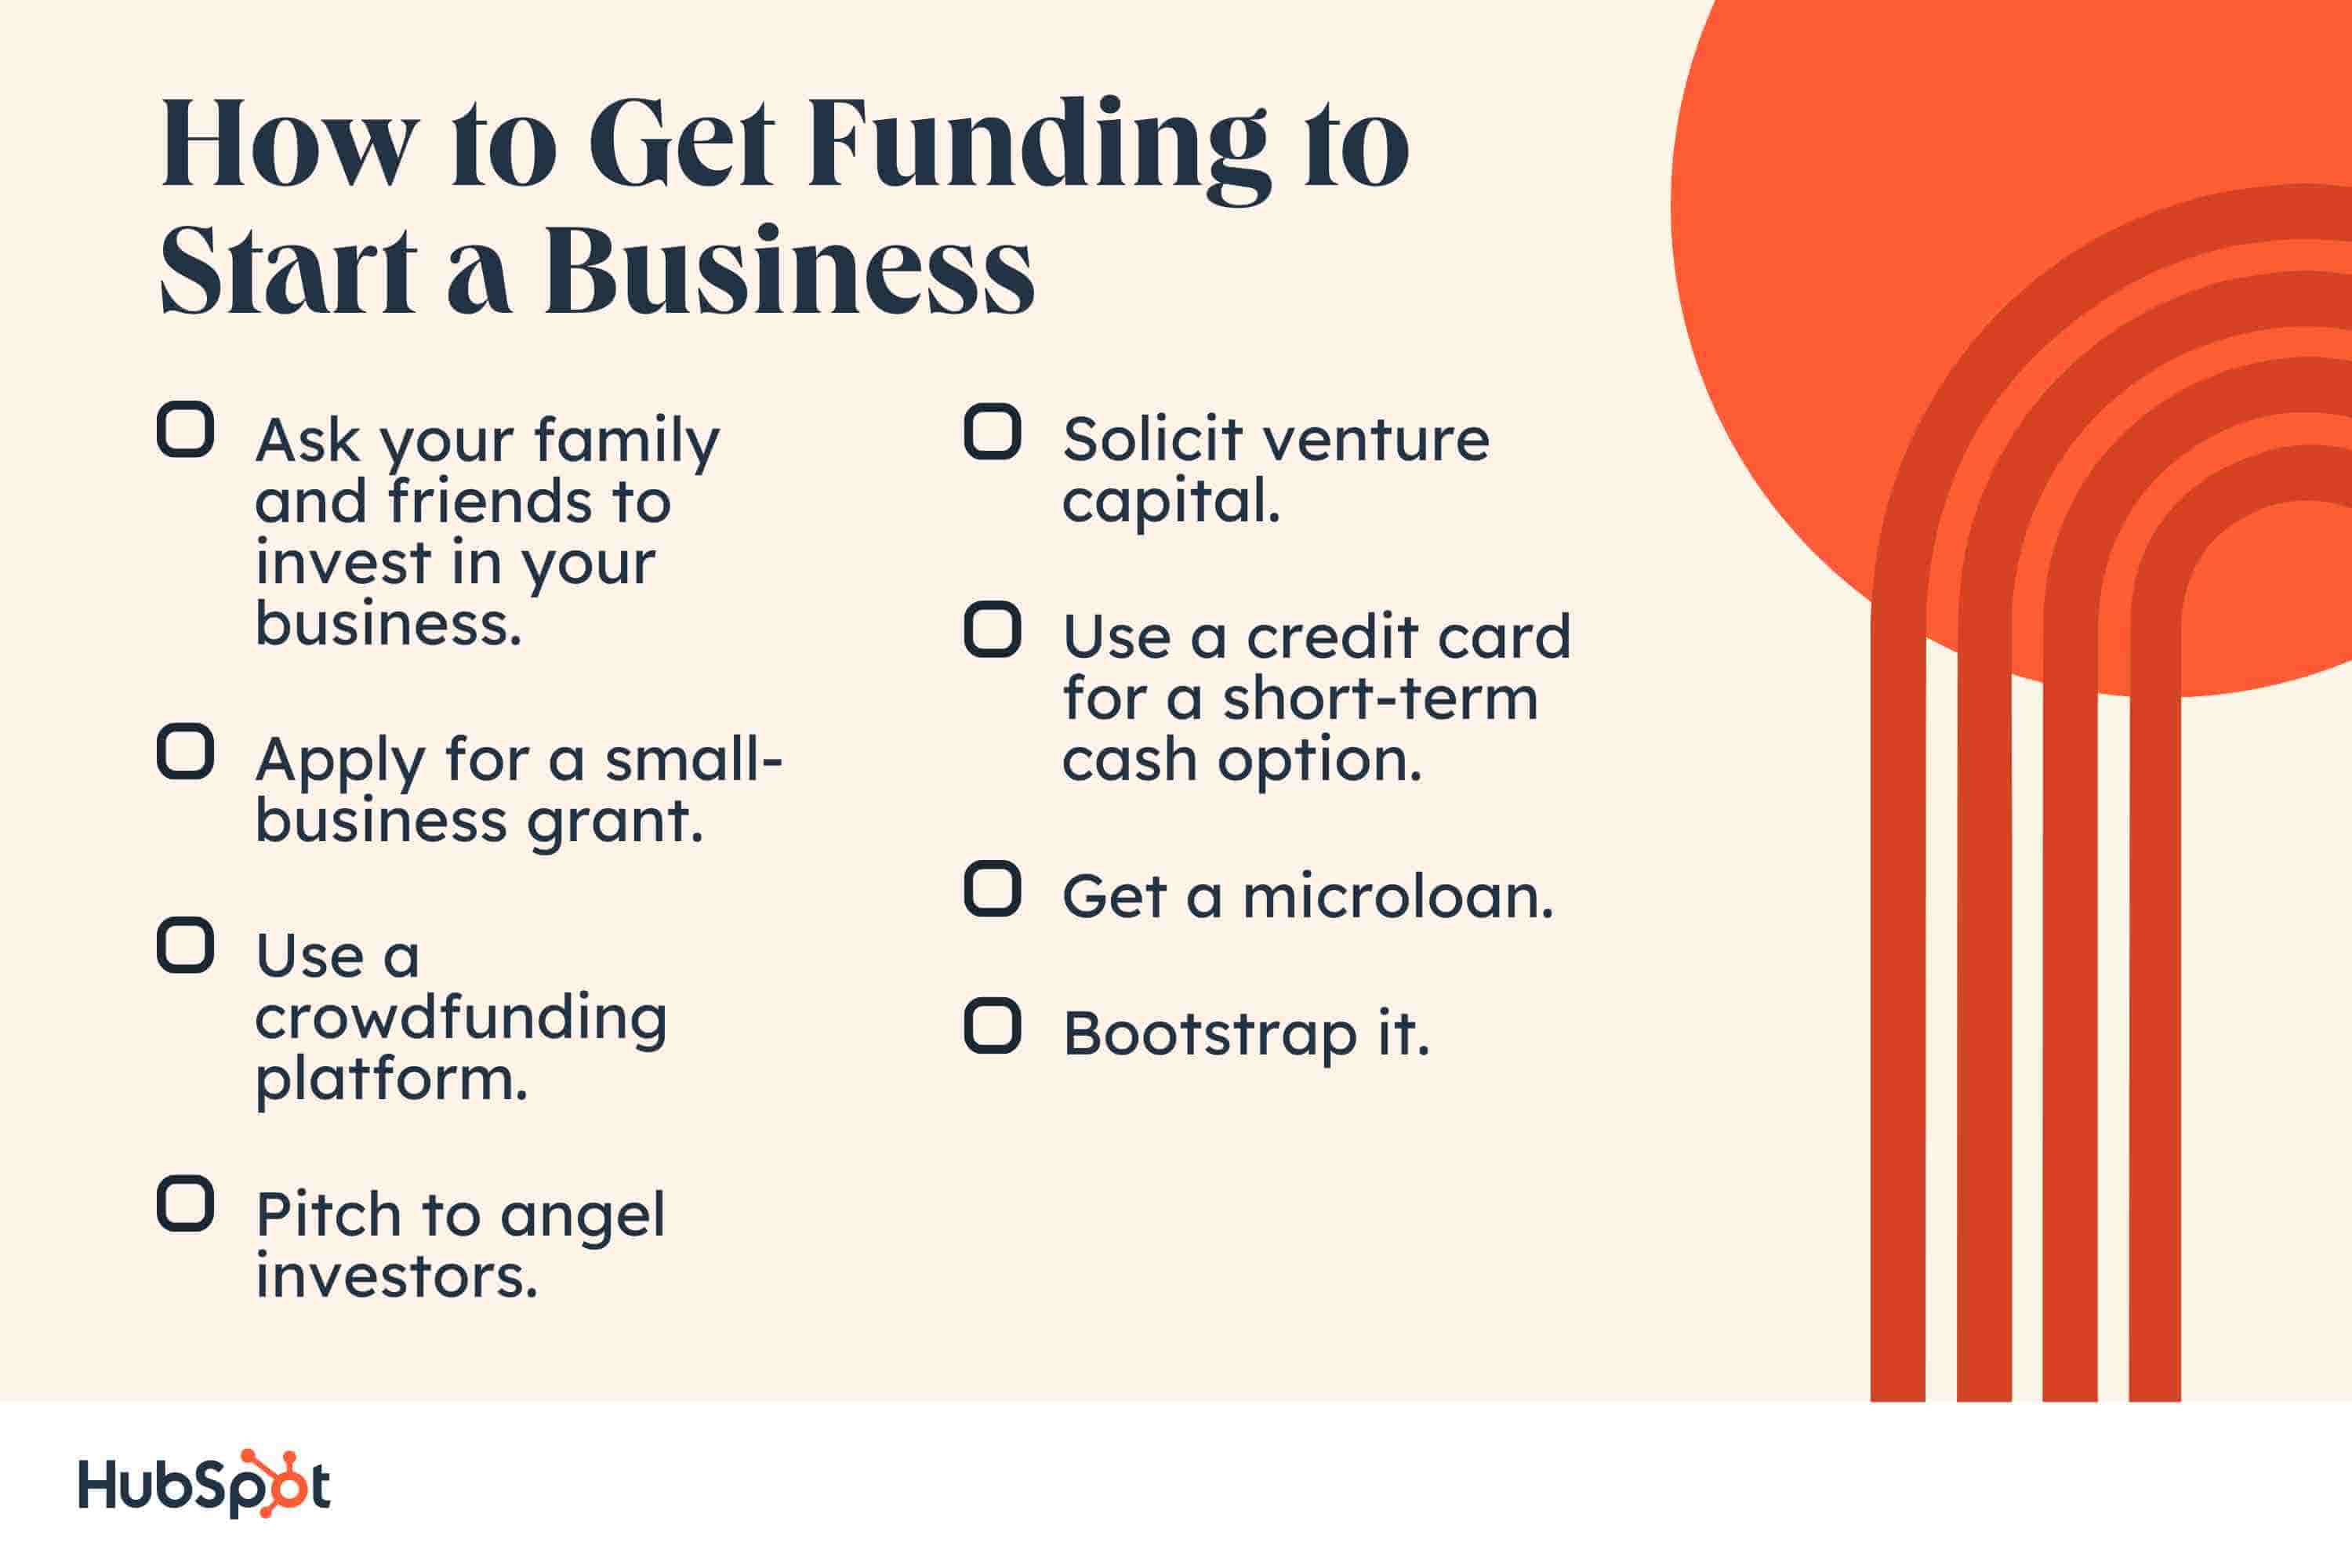 How to Get Funding to Start a Business. Ask your family and friends to invest in your business. Pitch to angel investors. Apply for a small-business grant. Solicit venture capital. Use a crowdfunding platform. Use a credit card for a short-term cash option. Get a microloan. Bootstrap it.